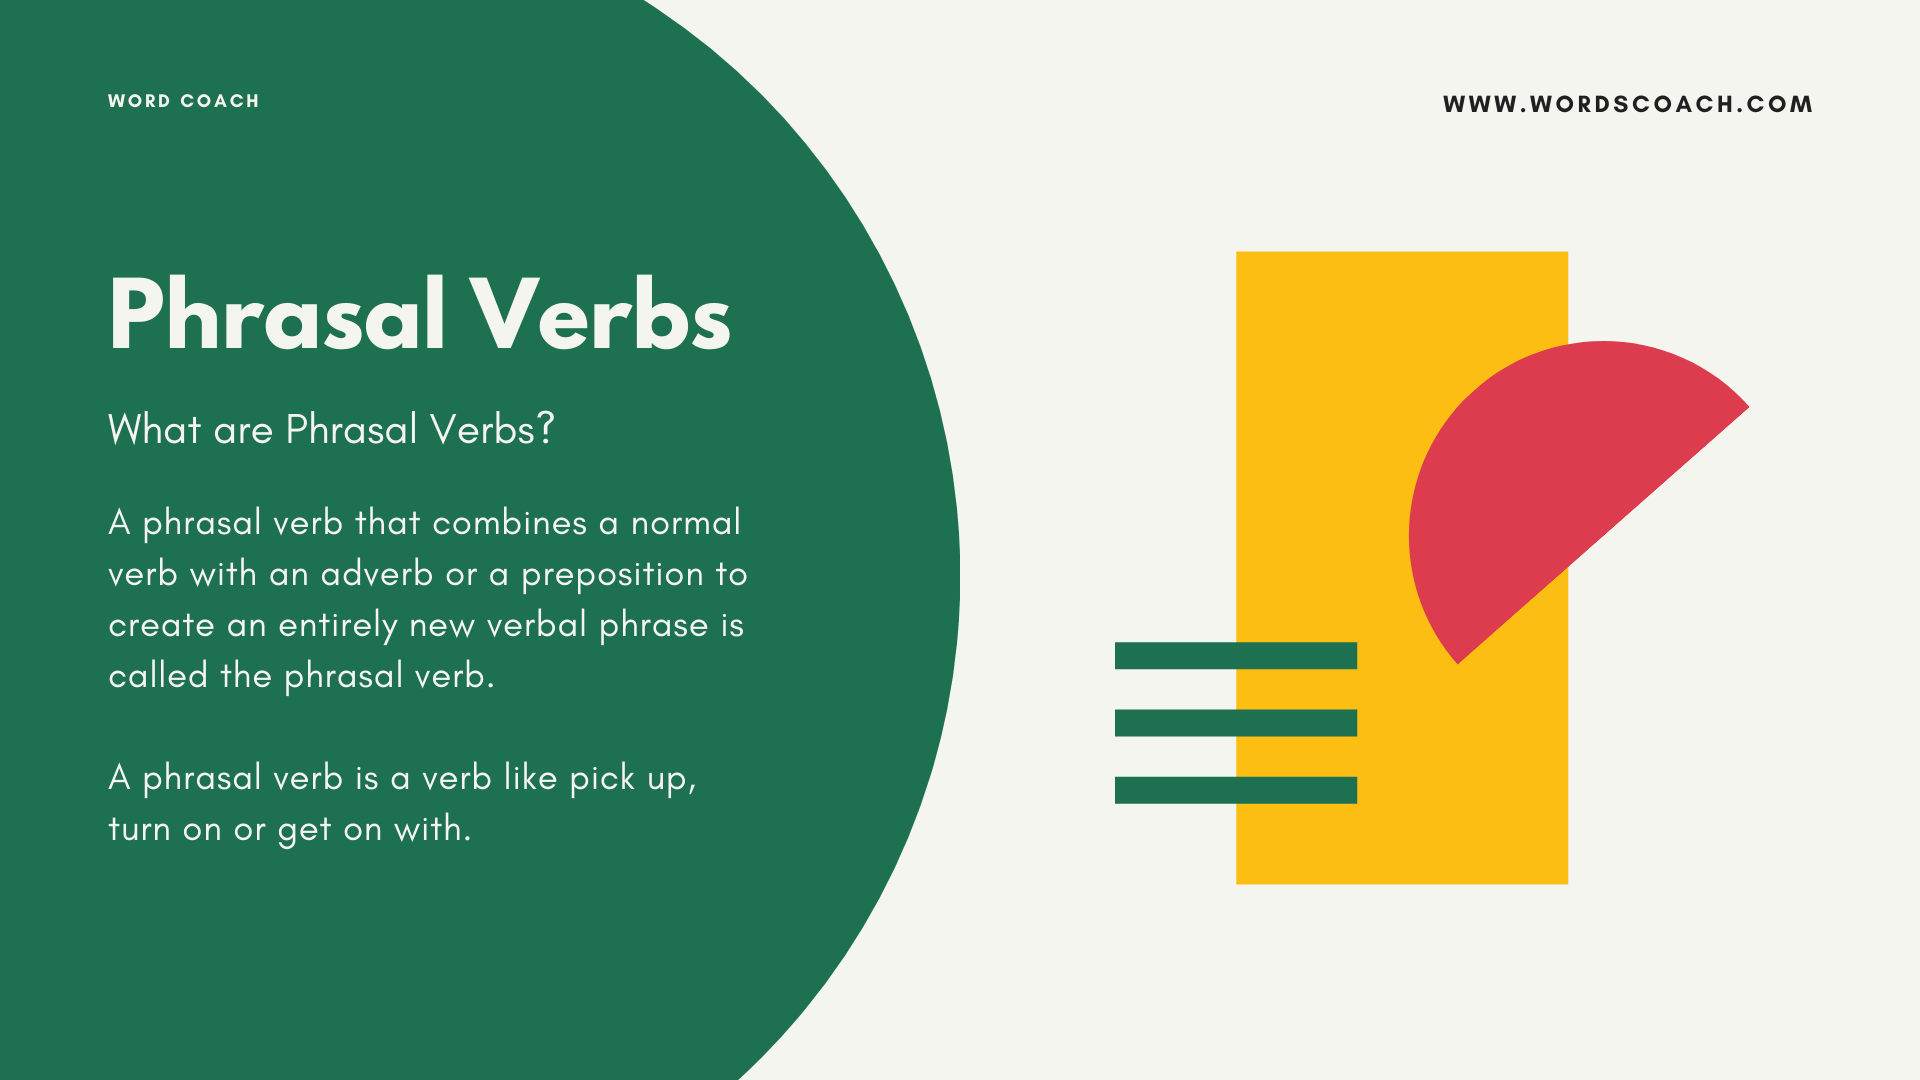 What are Phrasal Verbs?